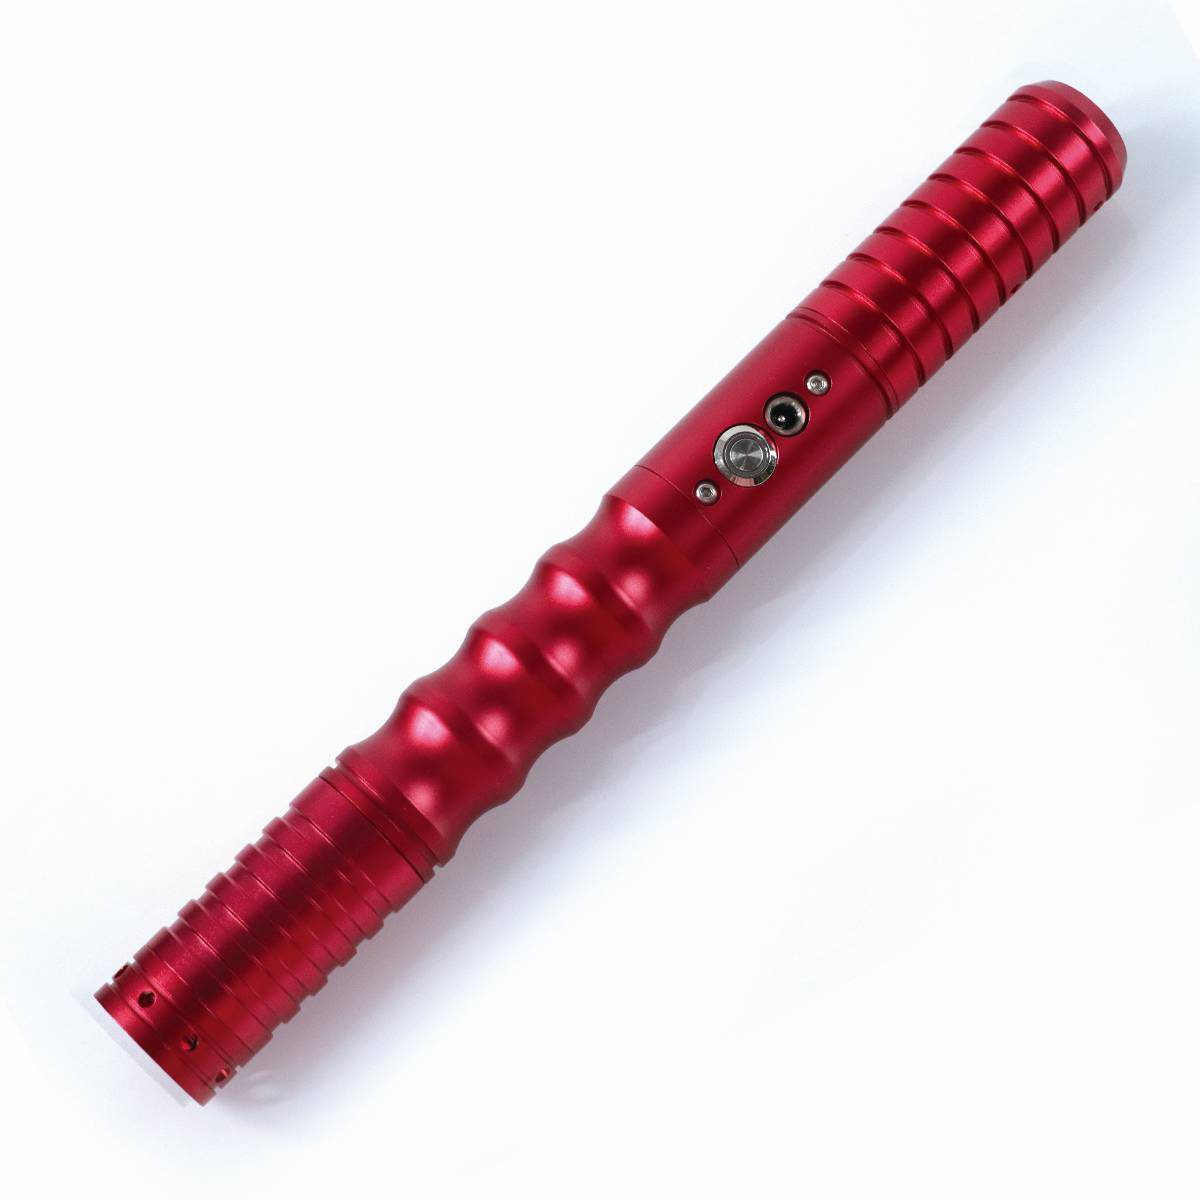 Ammo lightsaber Red / RGB isabers